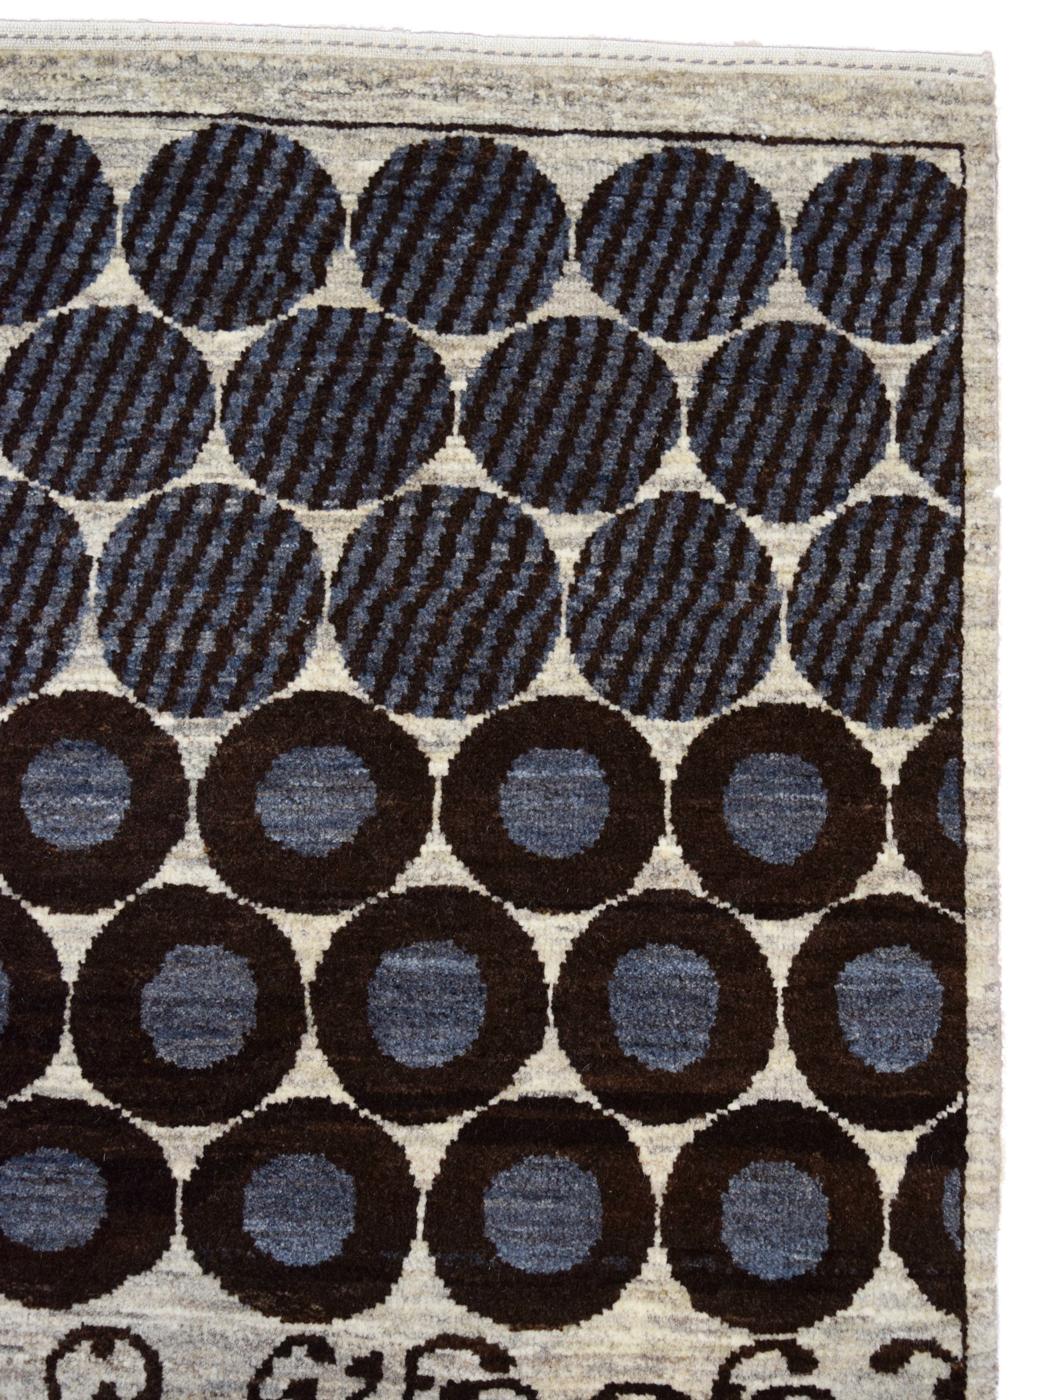 Measuring 2’7” x 5’4”, this modern carpet from the Orley Shabahang Architectural collection, titled Strata, is hand-knotted in steel gray, dark brown, and cream wool. Its background of cream wool acts as the perfect setting for Strata’s rocky